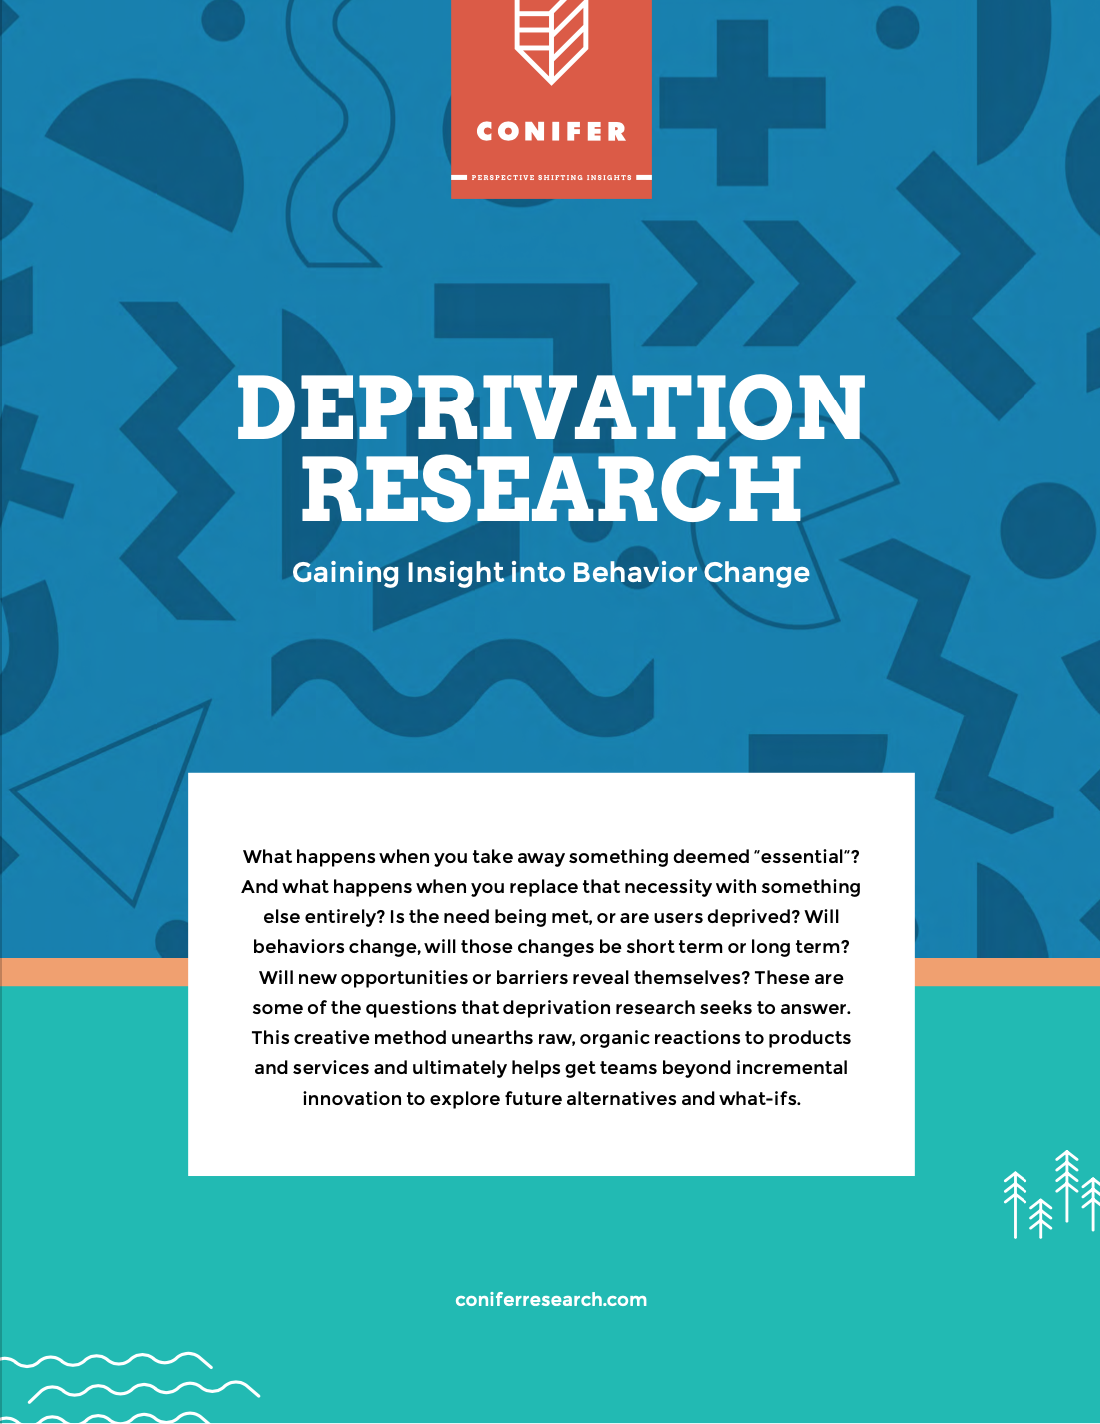 Deprivation Research